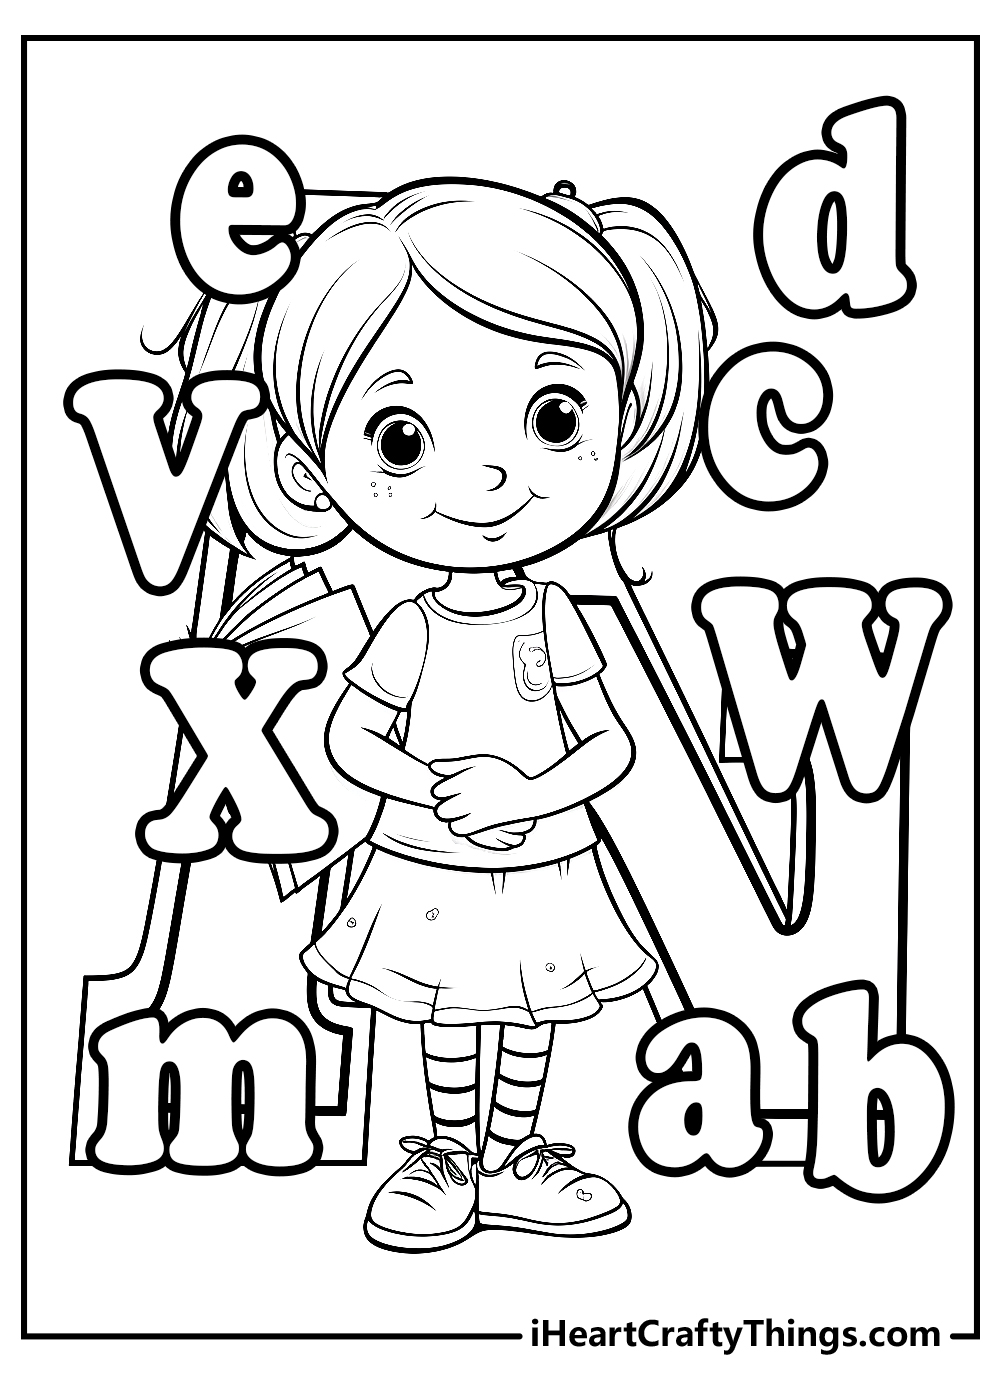 Alphabet coloring pages free printables